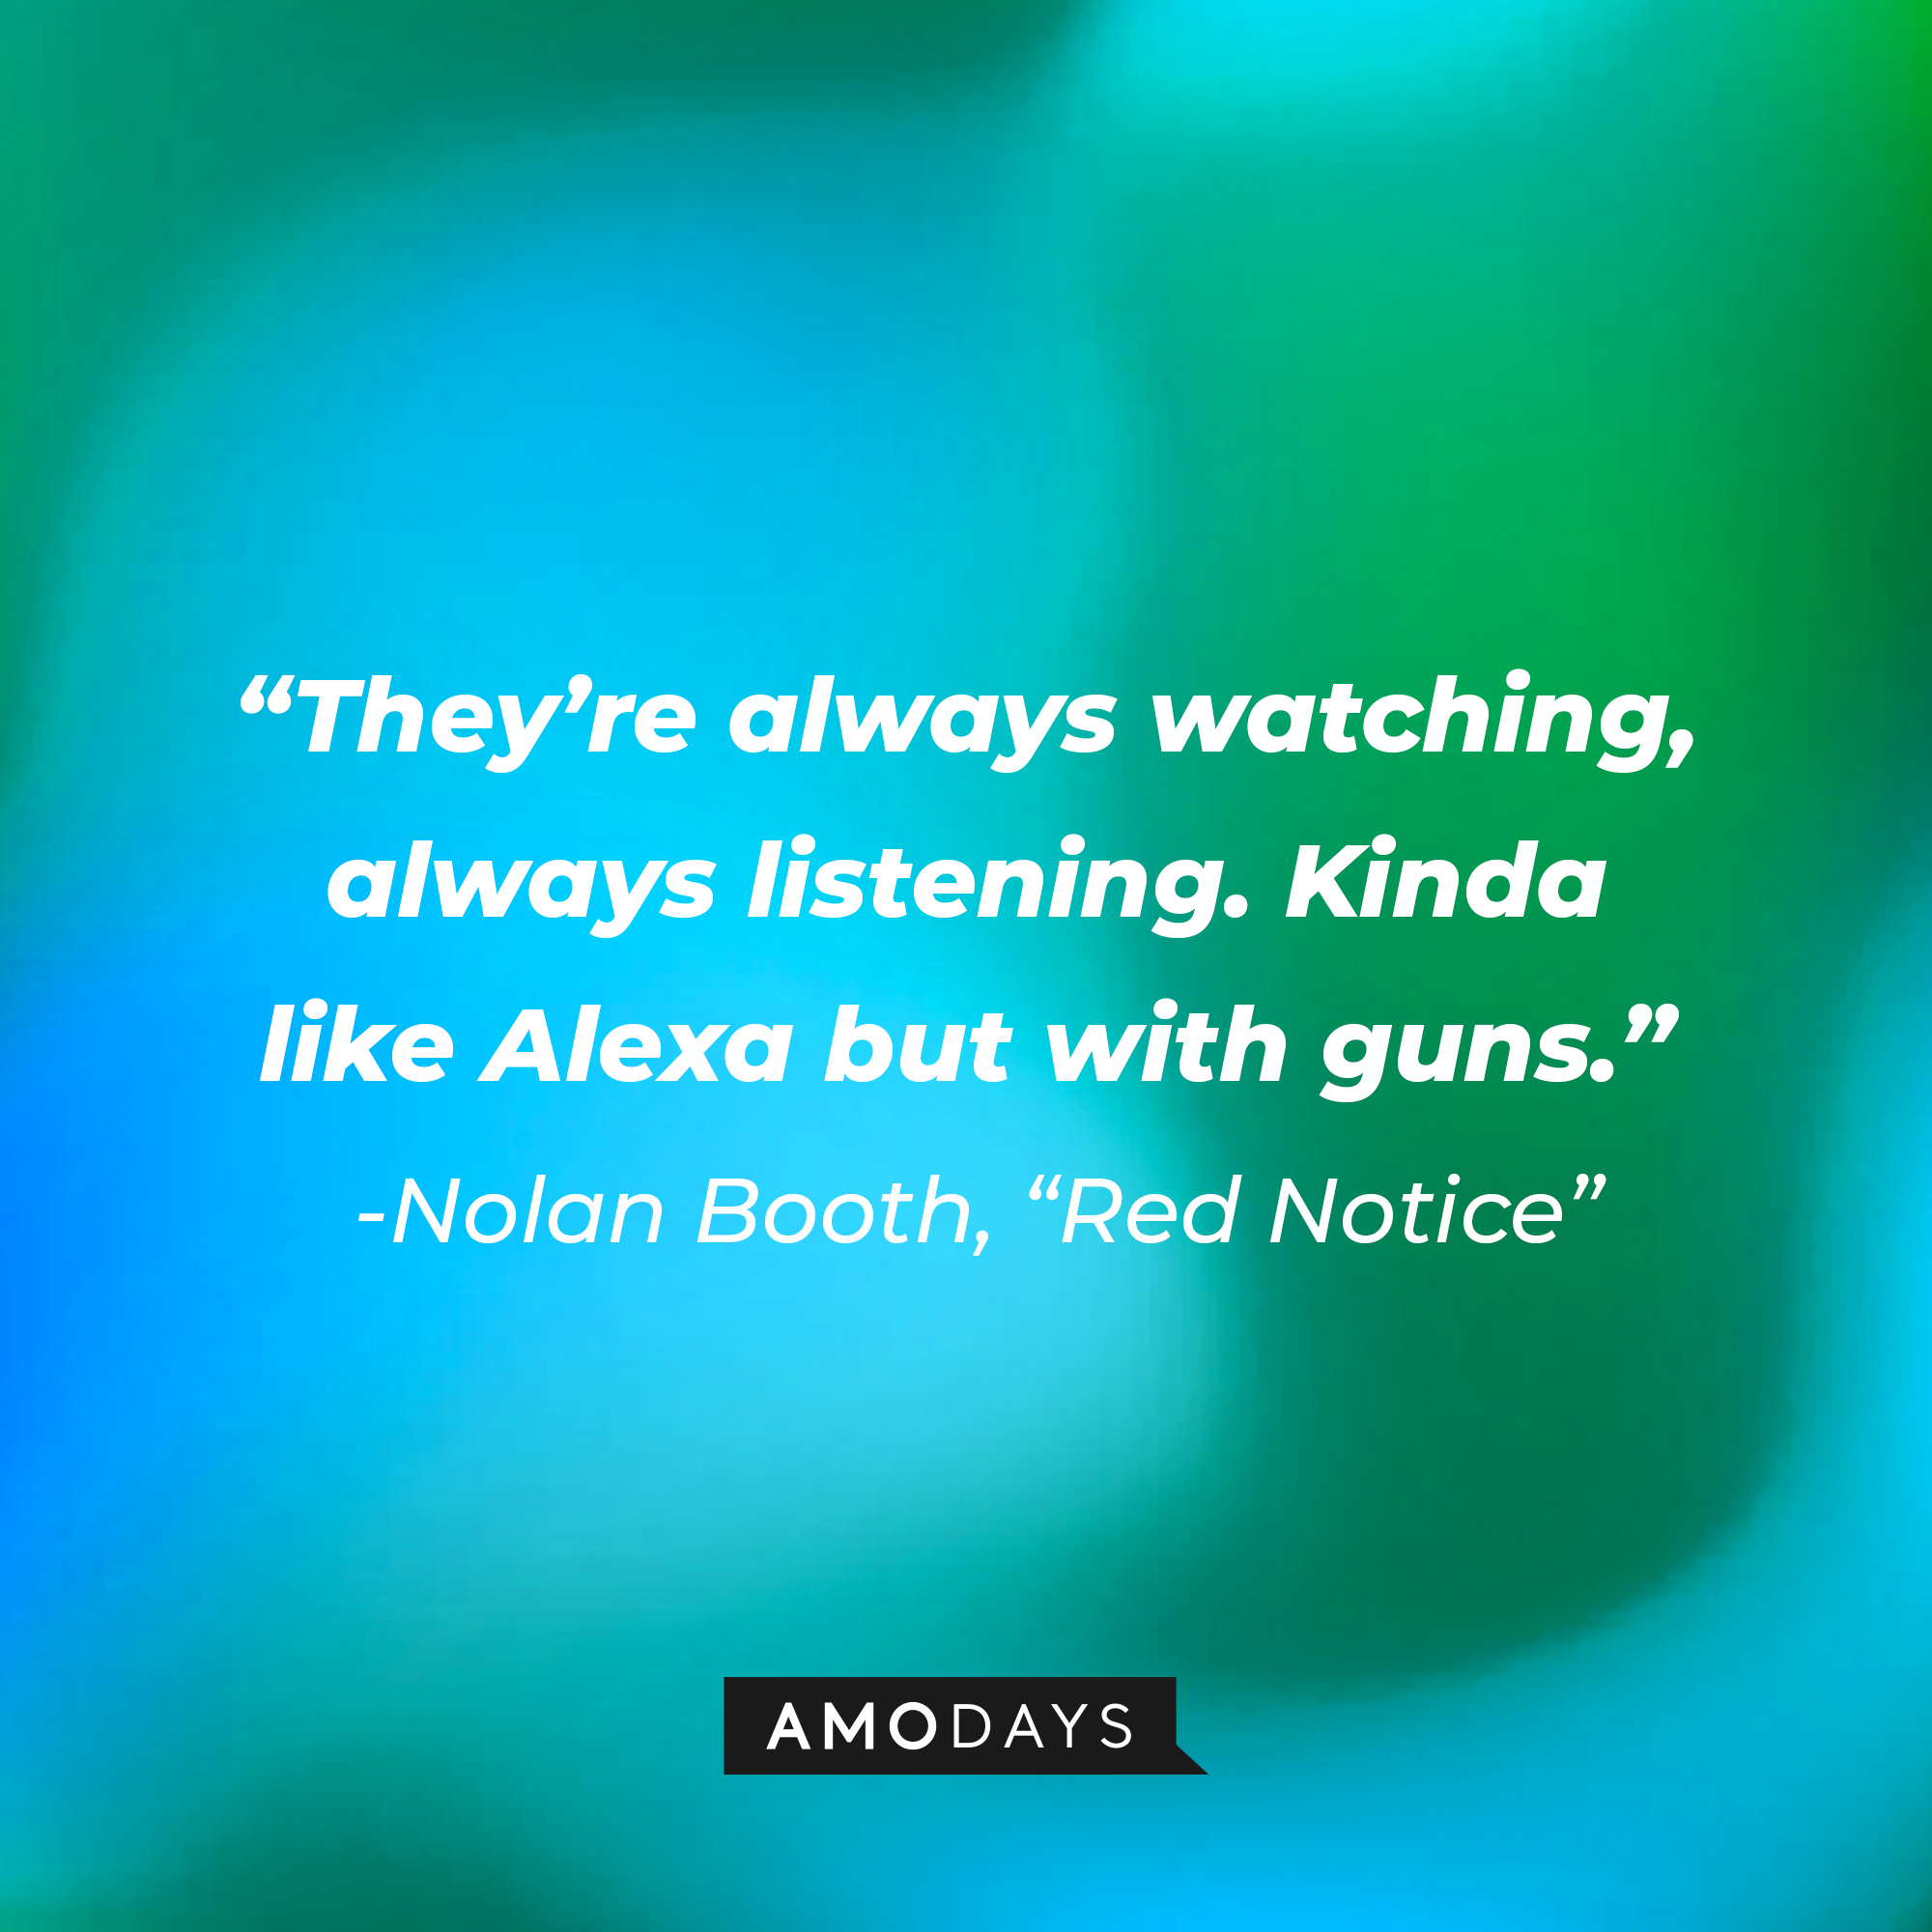 Nolan Booth's quote from "Red Notice:" “They’re always watching, always listening. Kinda like Alexa but with guns.” | Source: AmoDays